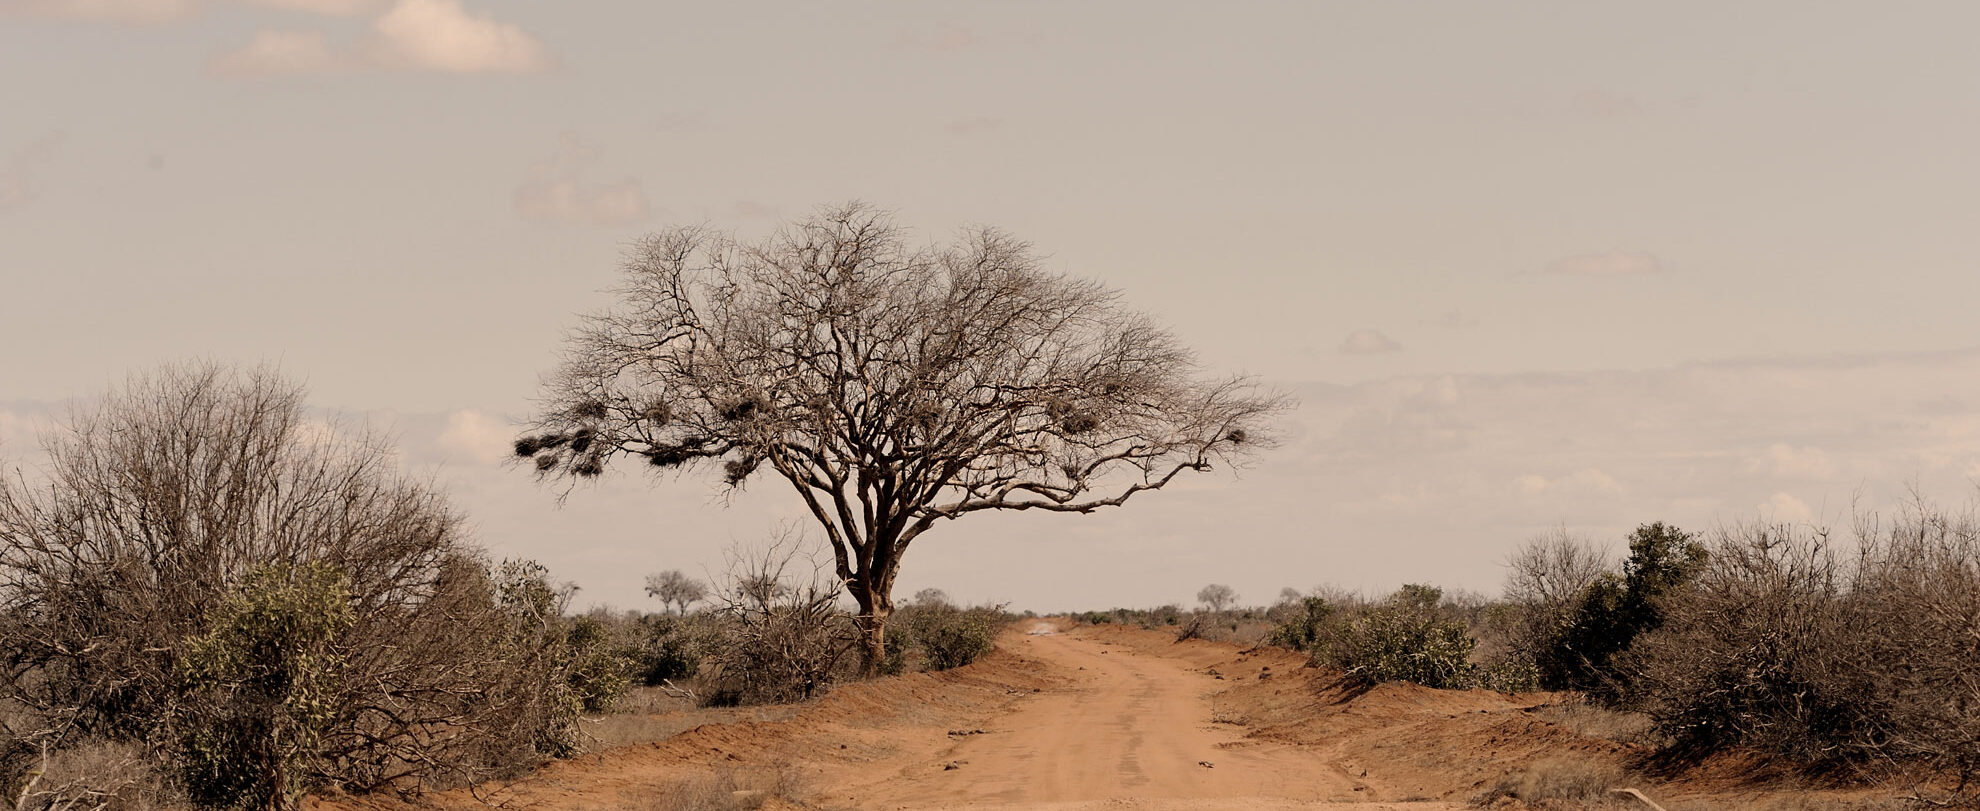 Lone tree with bird nests in the African veld